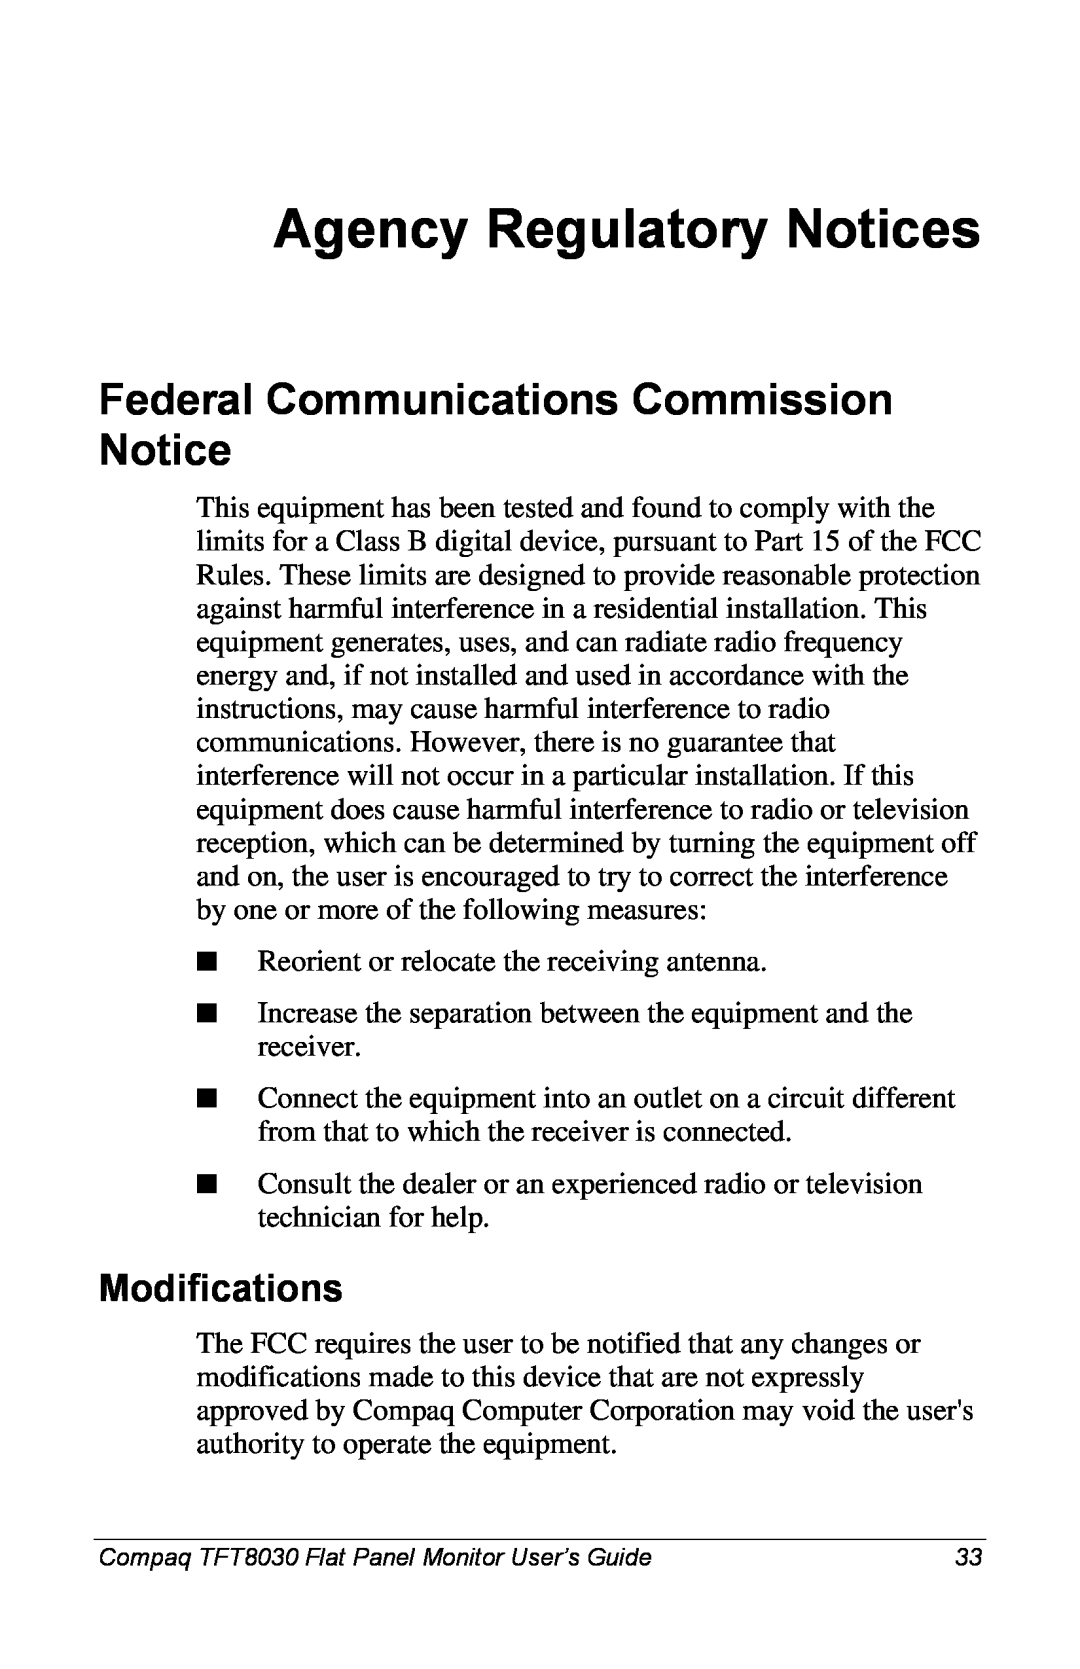 Compaq 8030 manual Federal Communications Commission Notice, Modifications, Agency Regulatory Notices 